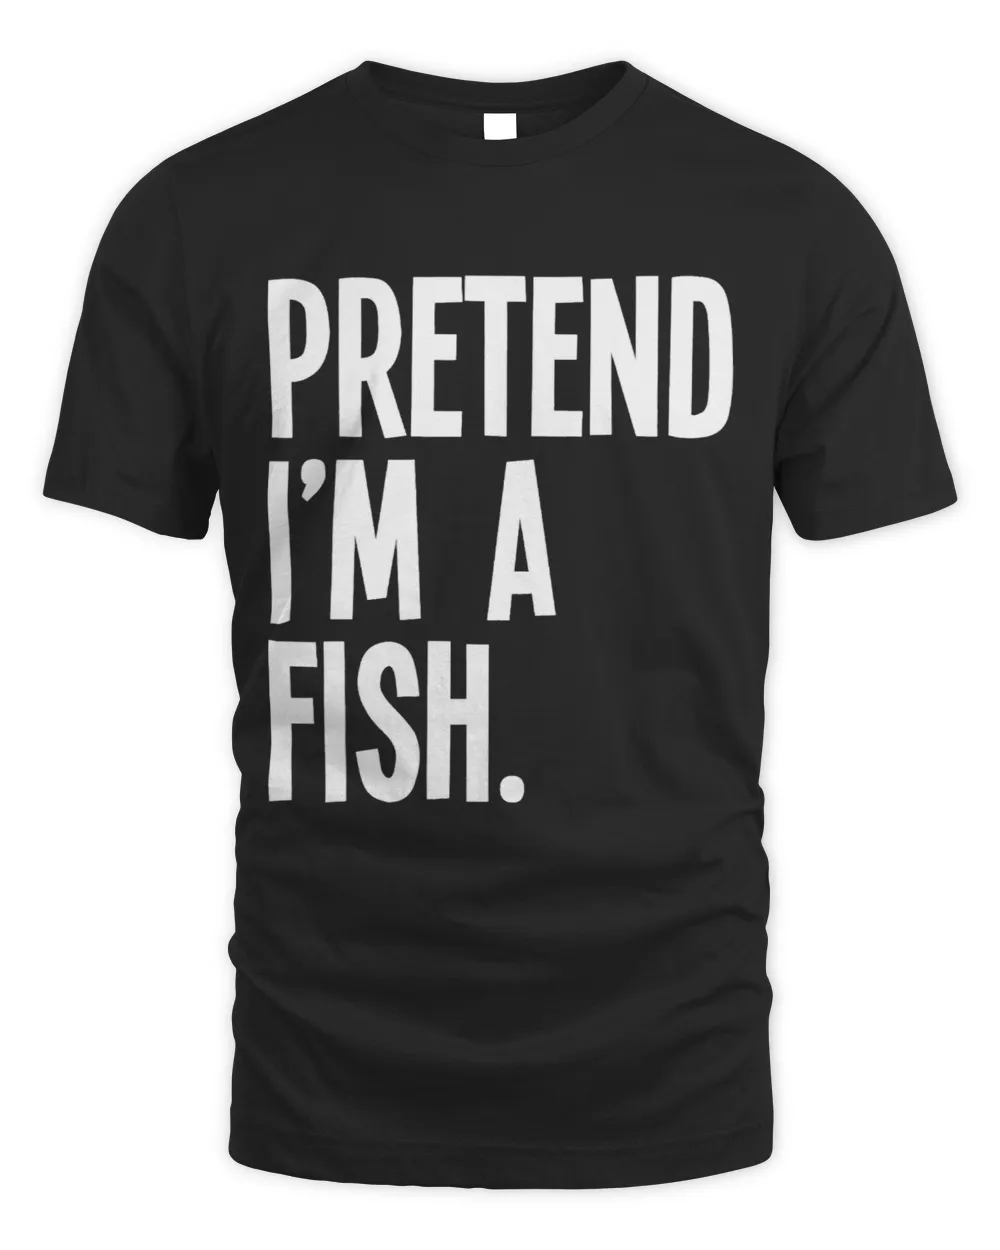 Pretend Im A Fish Funny Halloween Party Costume